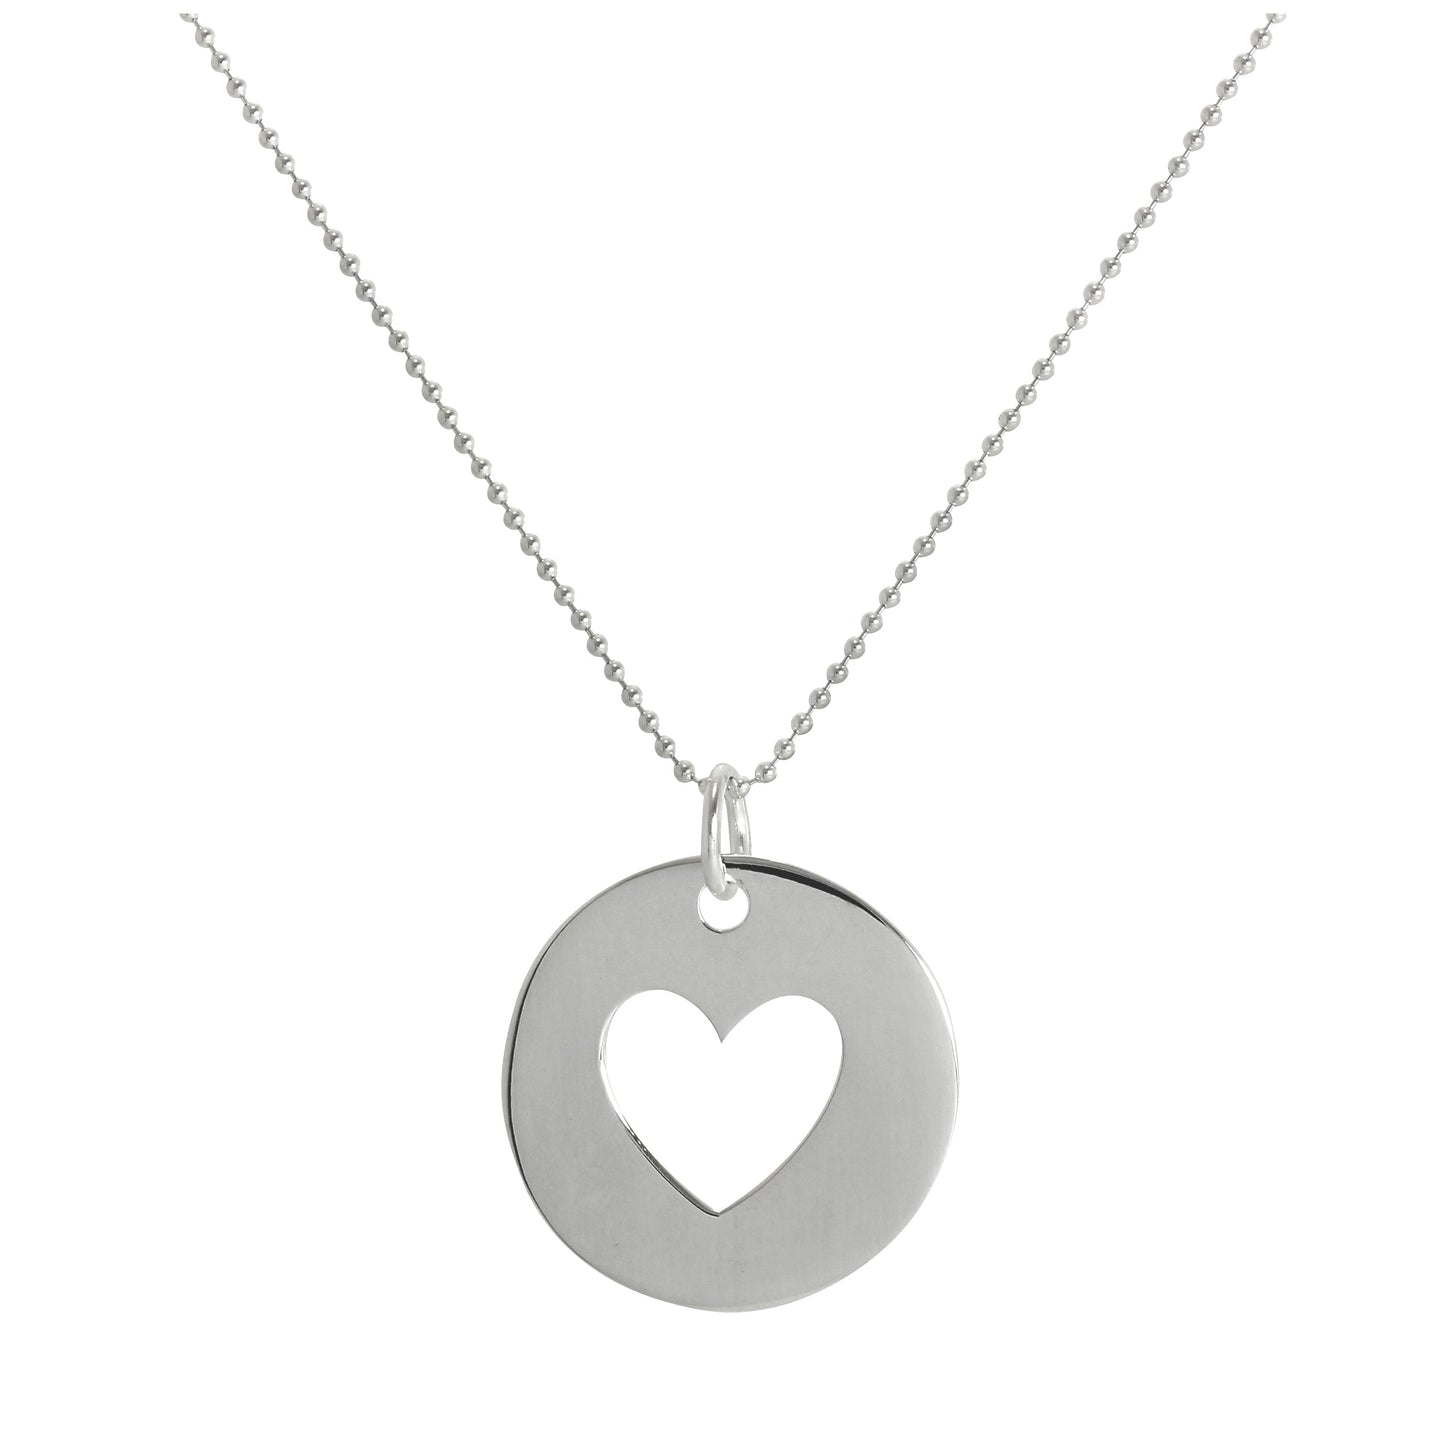 Large Sterling Silver Cut Out Heart Disc Pendant Necklace 14 - 22 Inches